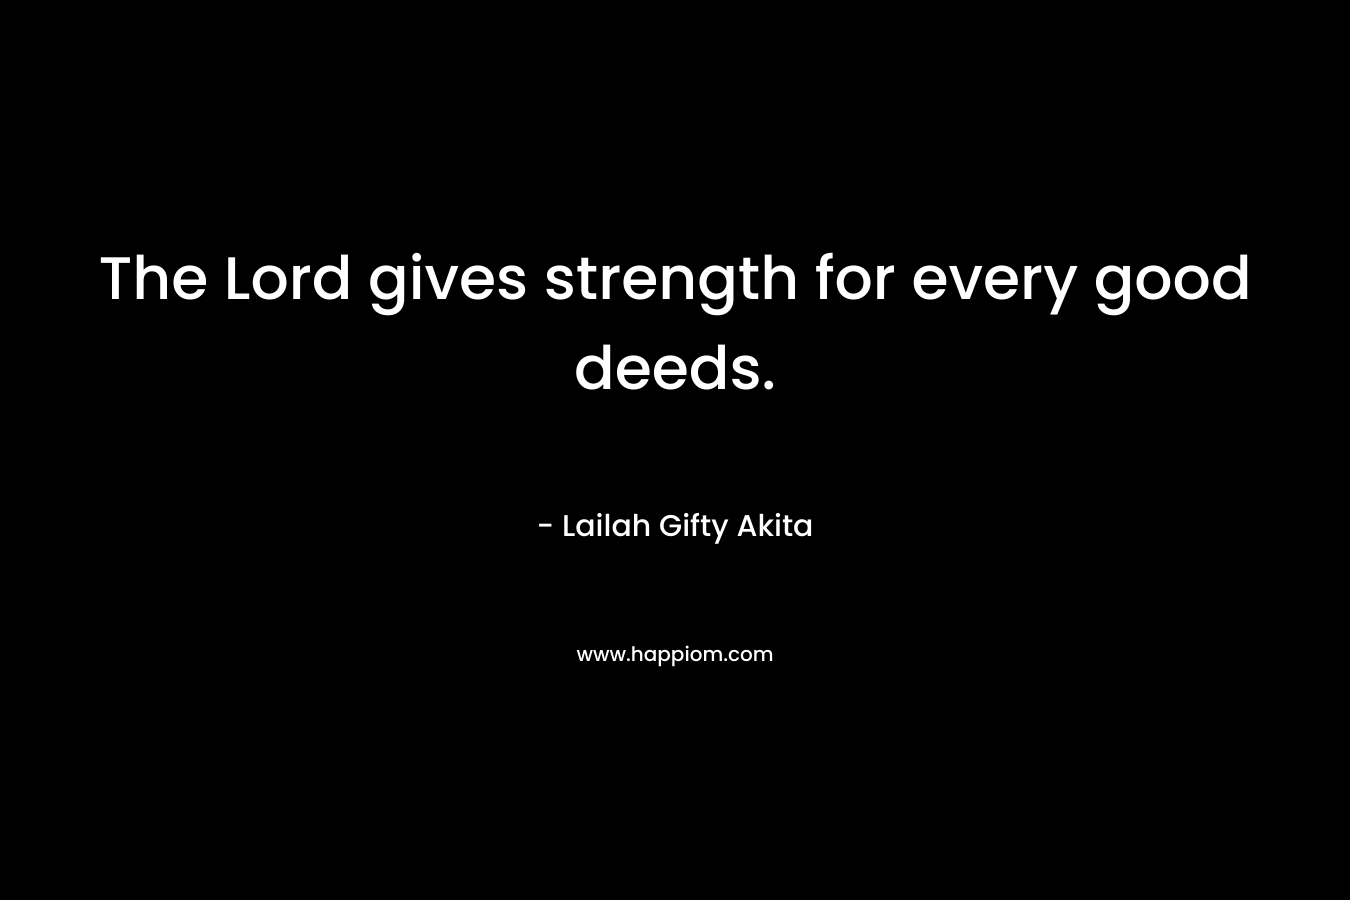 The Lord gives strength for every good deeds.